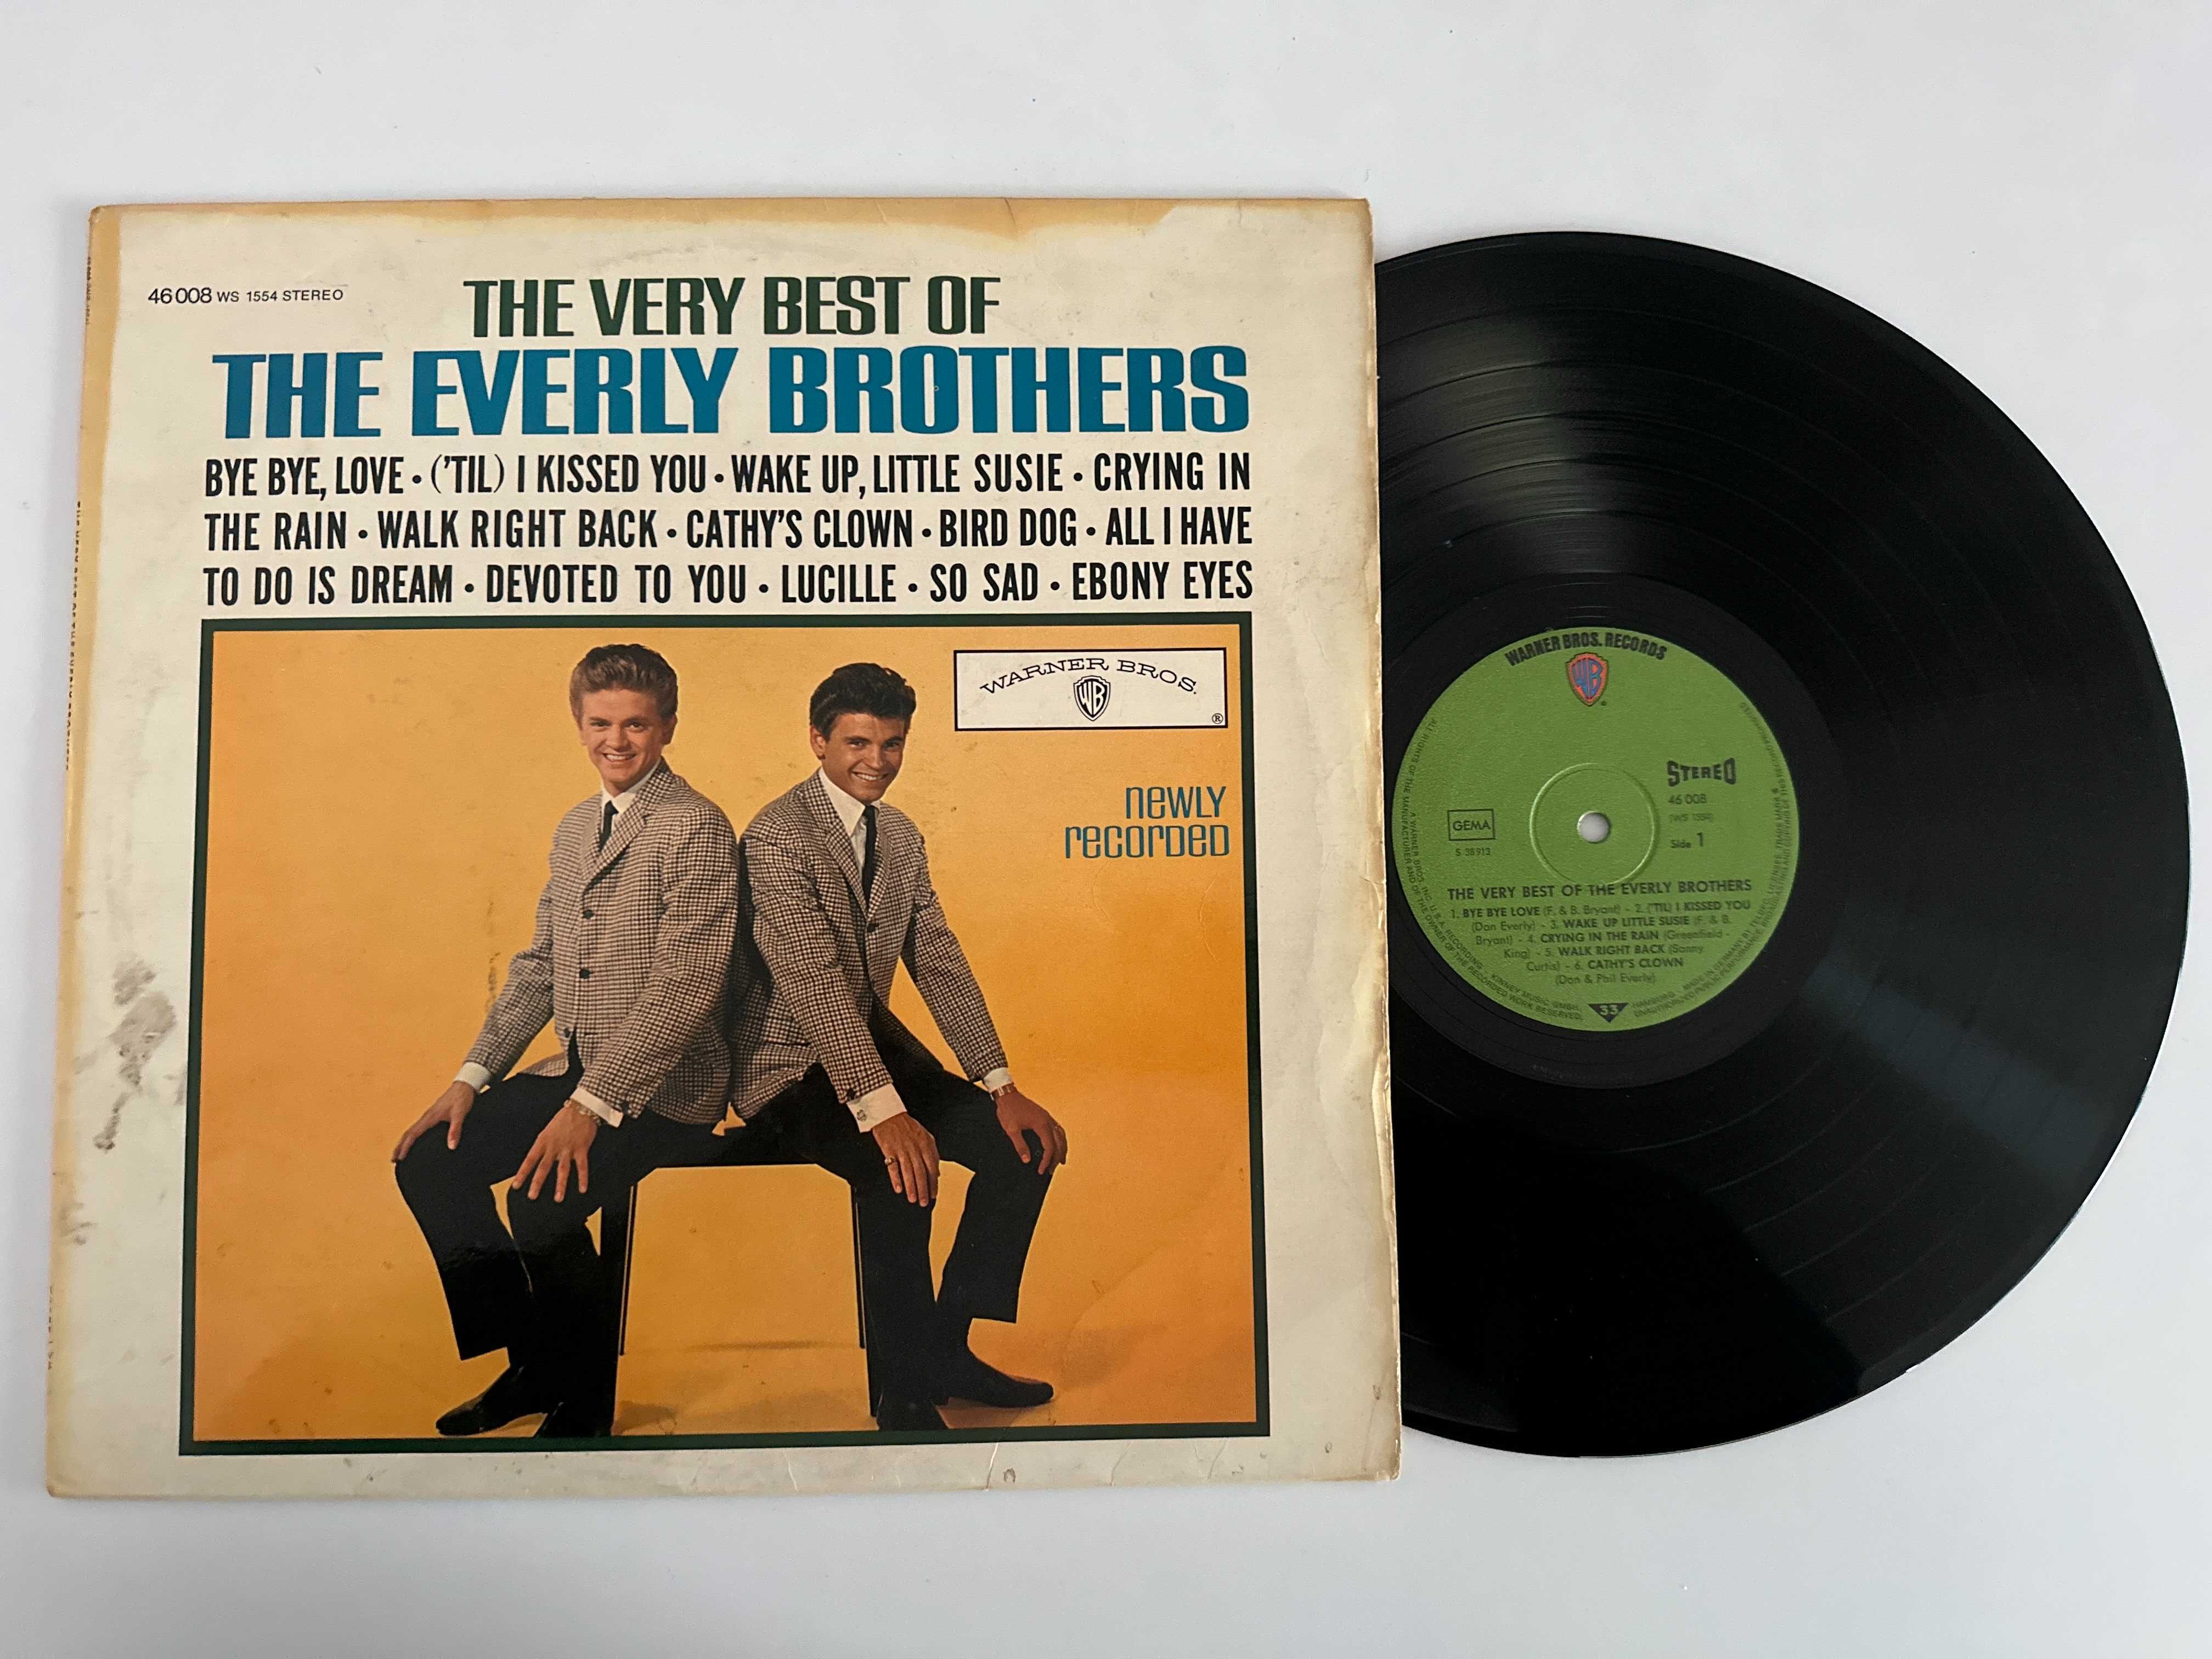 The Everly Brothers – The Very Best Of The Everly Brothers LP (A-149)